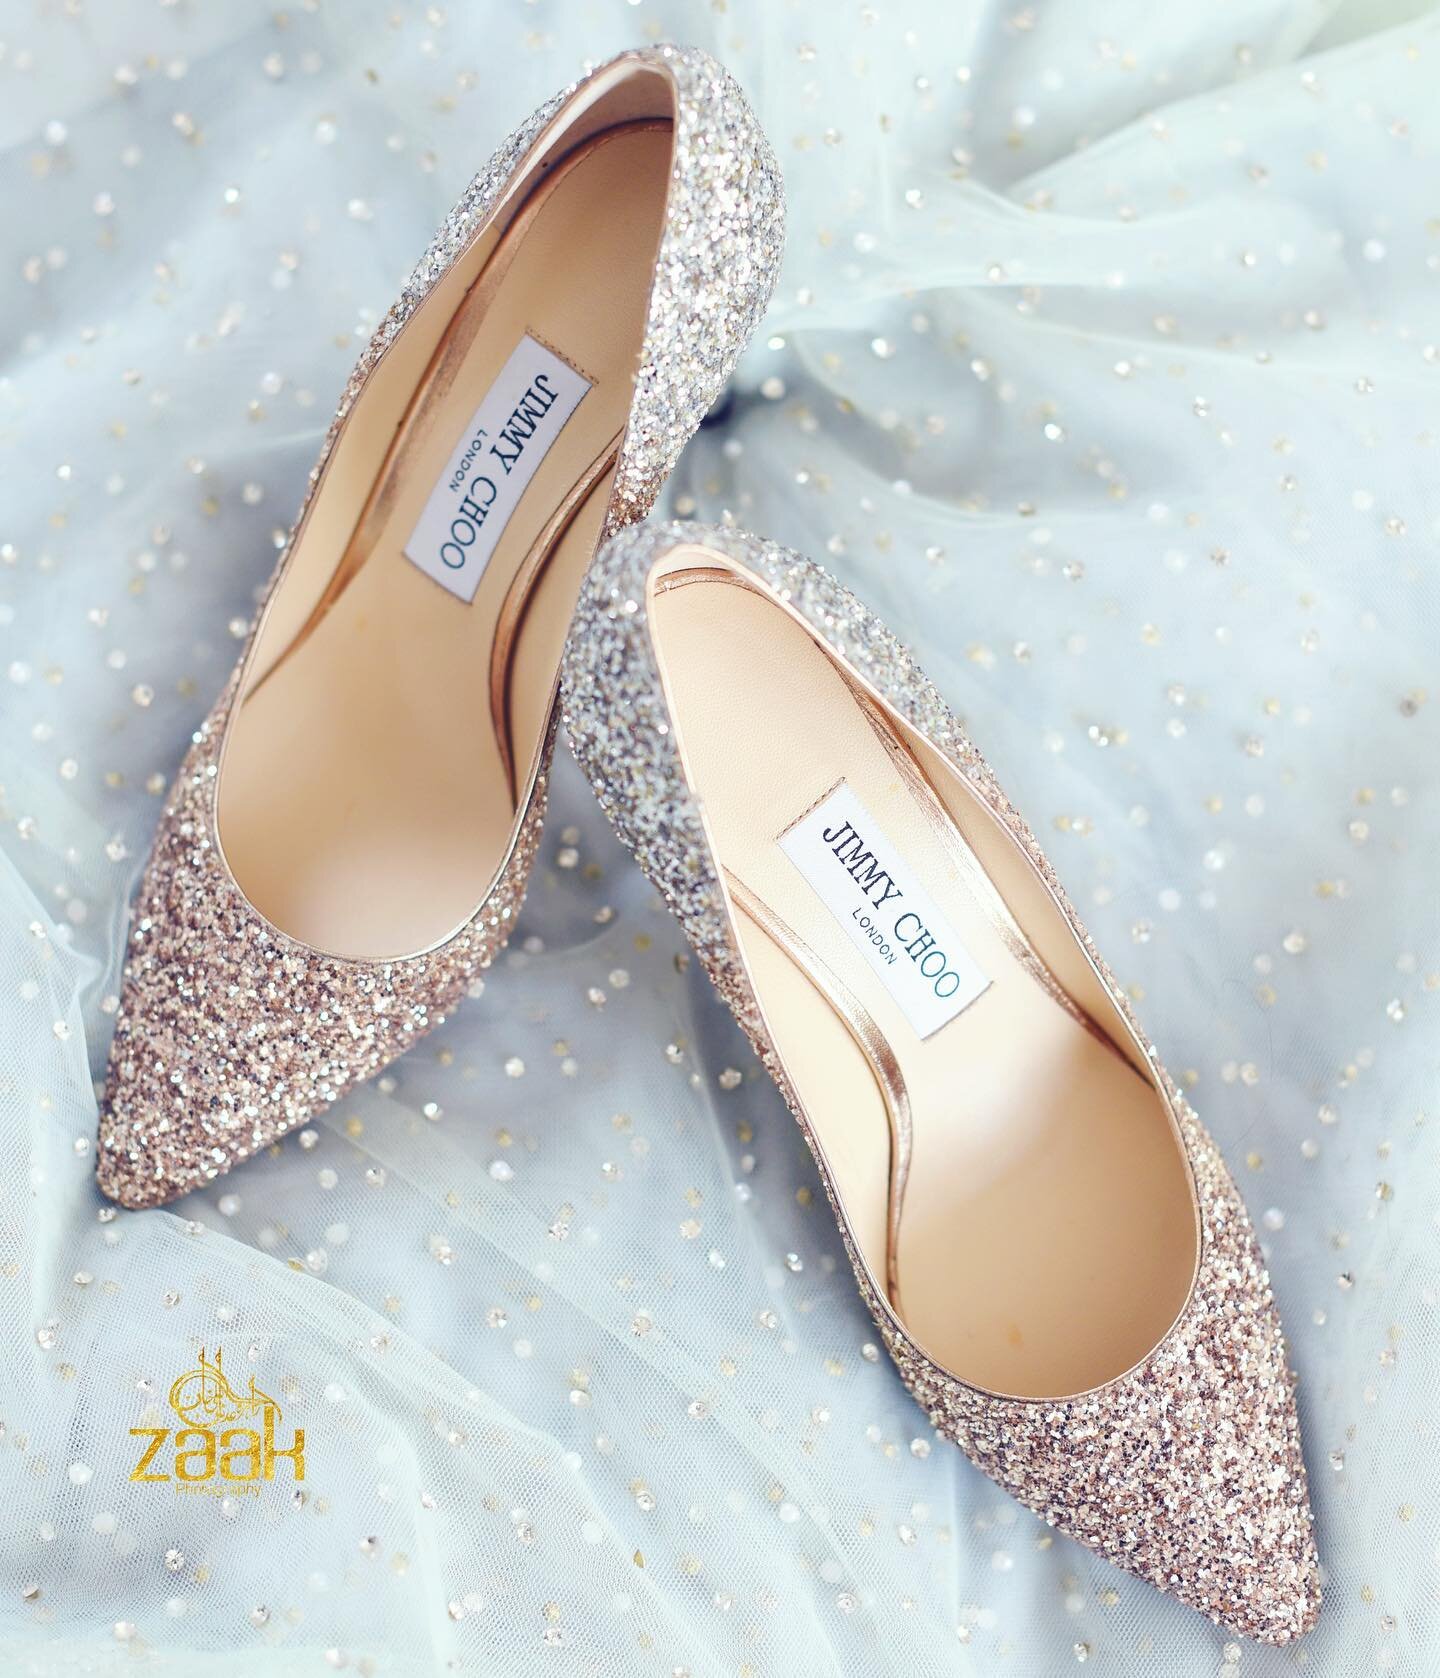 Sumaiyahs Choos 😍
Some say, Shoe love is True Love 💕 
Do you agree?
As a bride, is finding the perfect pair a top priority for you? I have known some for whom find the right pair has been the ultimate quest 👠 
Whatever you choose.. make sure you w